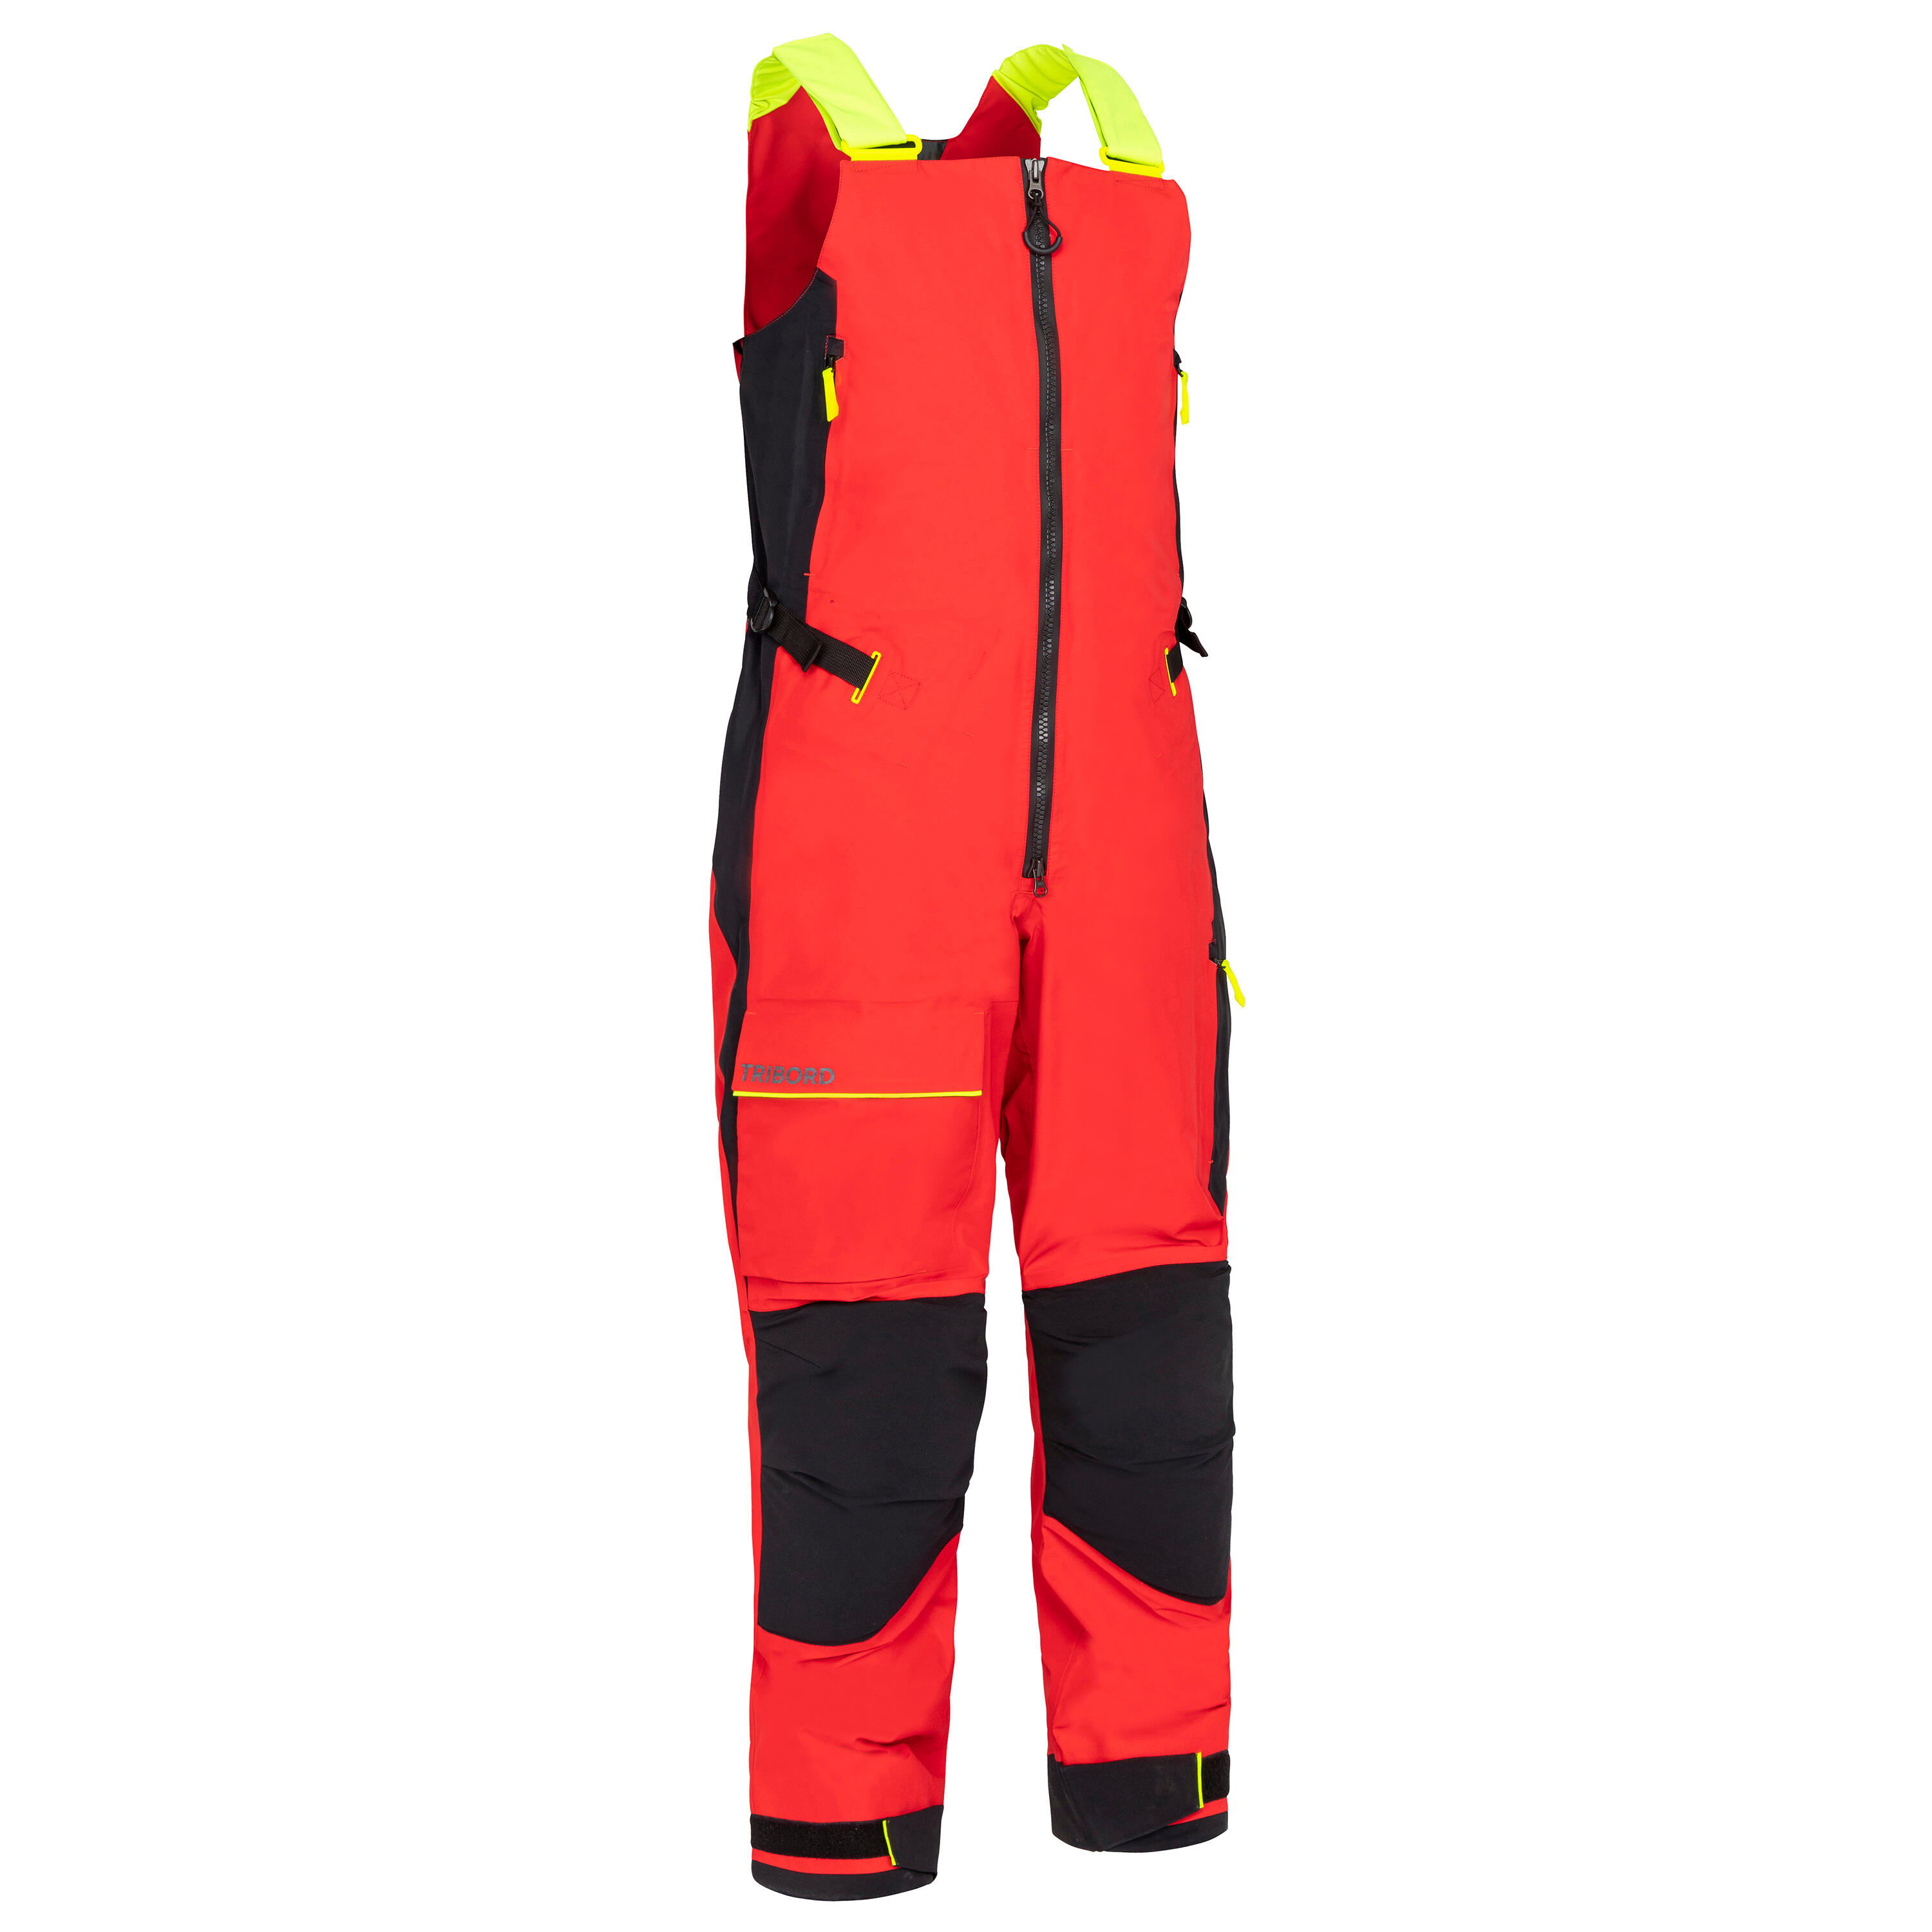 Adult Sailing overalls - Offshore 900 OPEN dropseat red 1/16